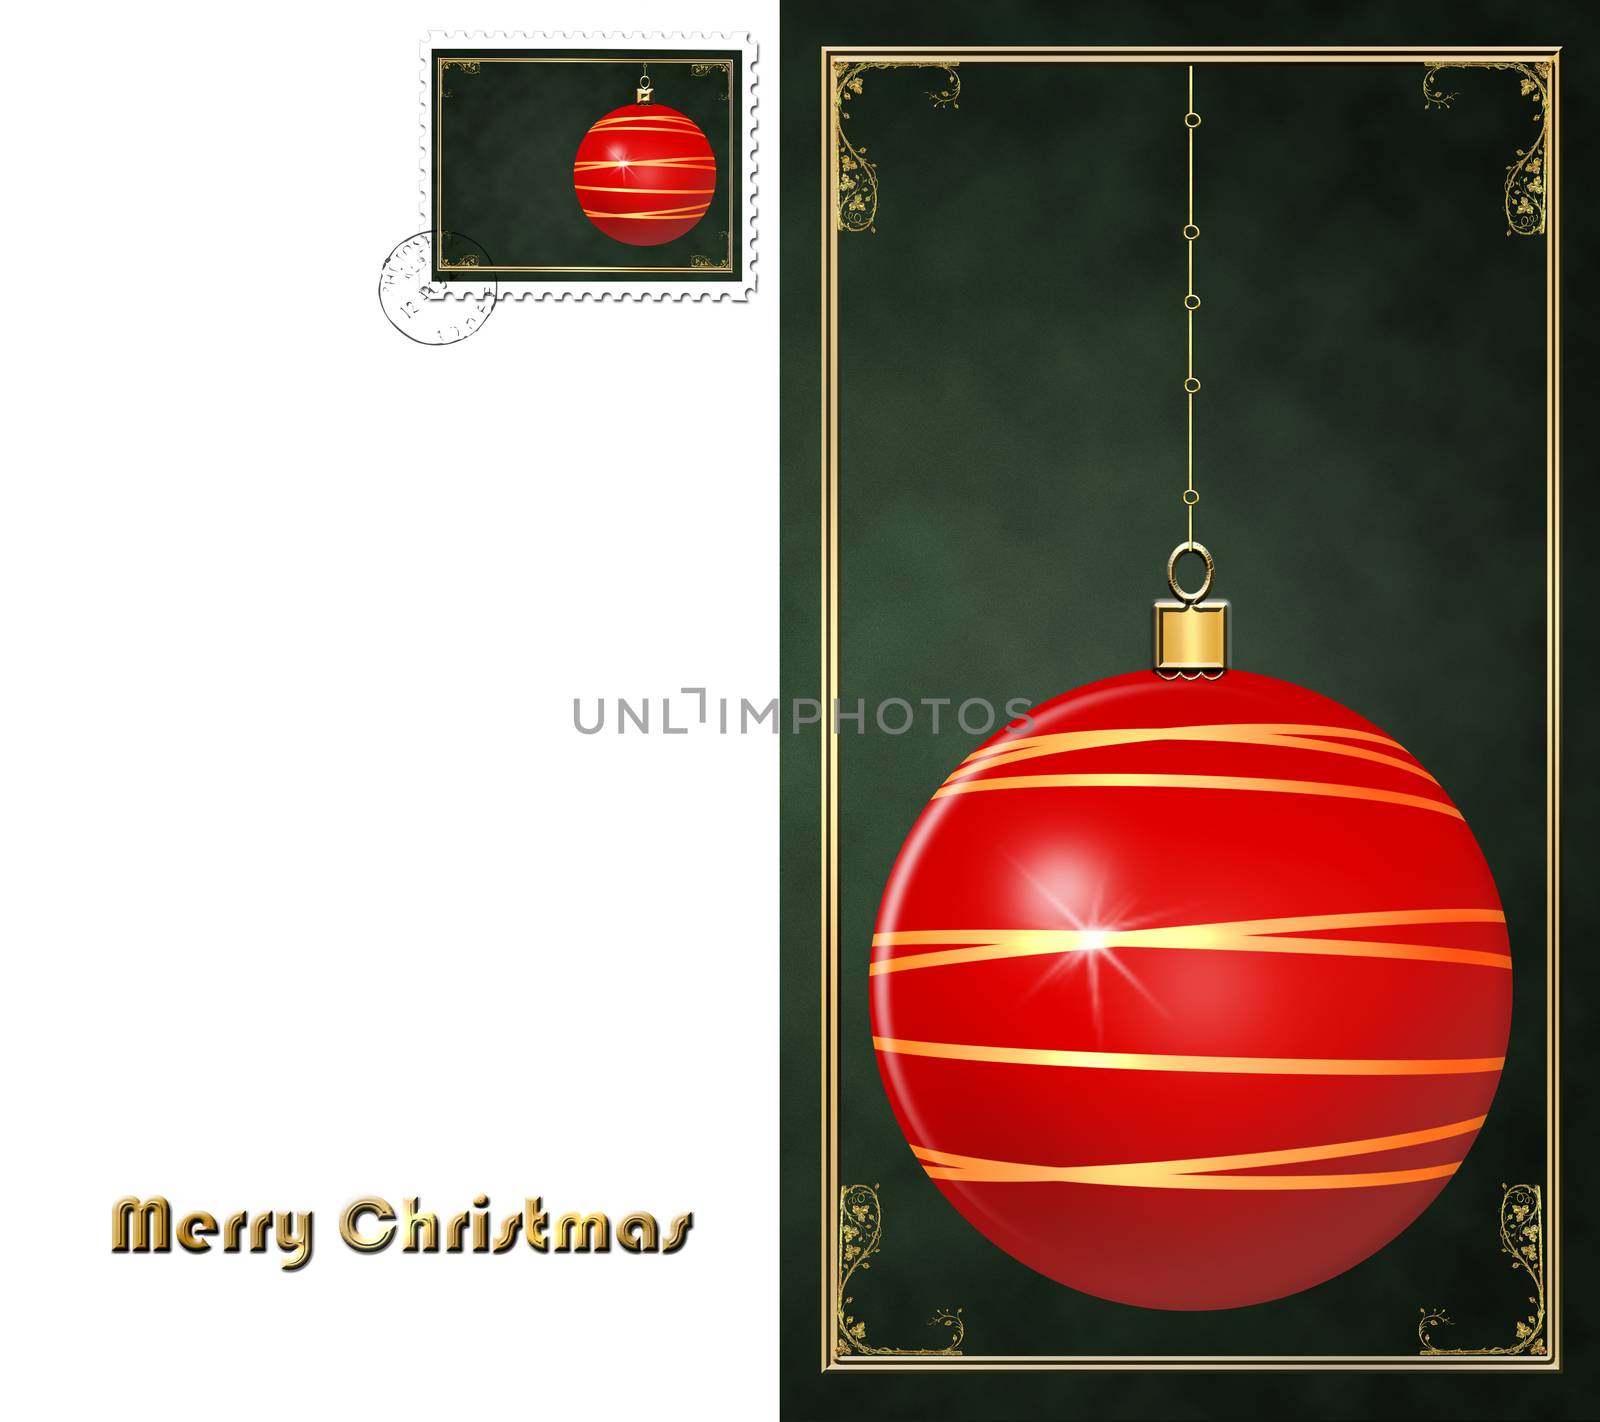 Vintage style post card. Red retro Christmas ball, gold decoration on grunge green background with gold frame. Stamp on white background. Text Merry Christmas. Place for text, mock up. 3D illustration